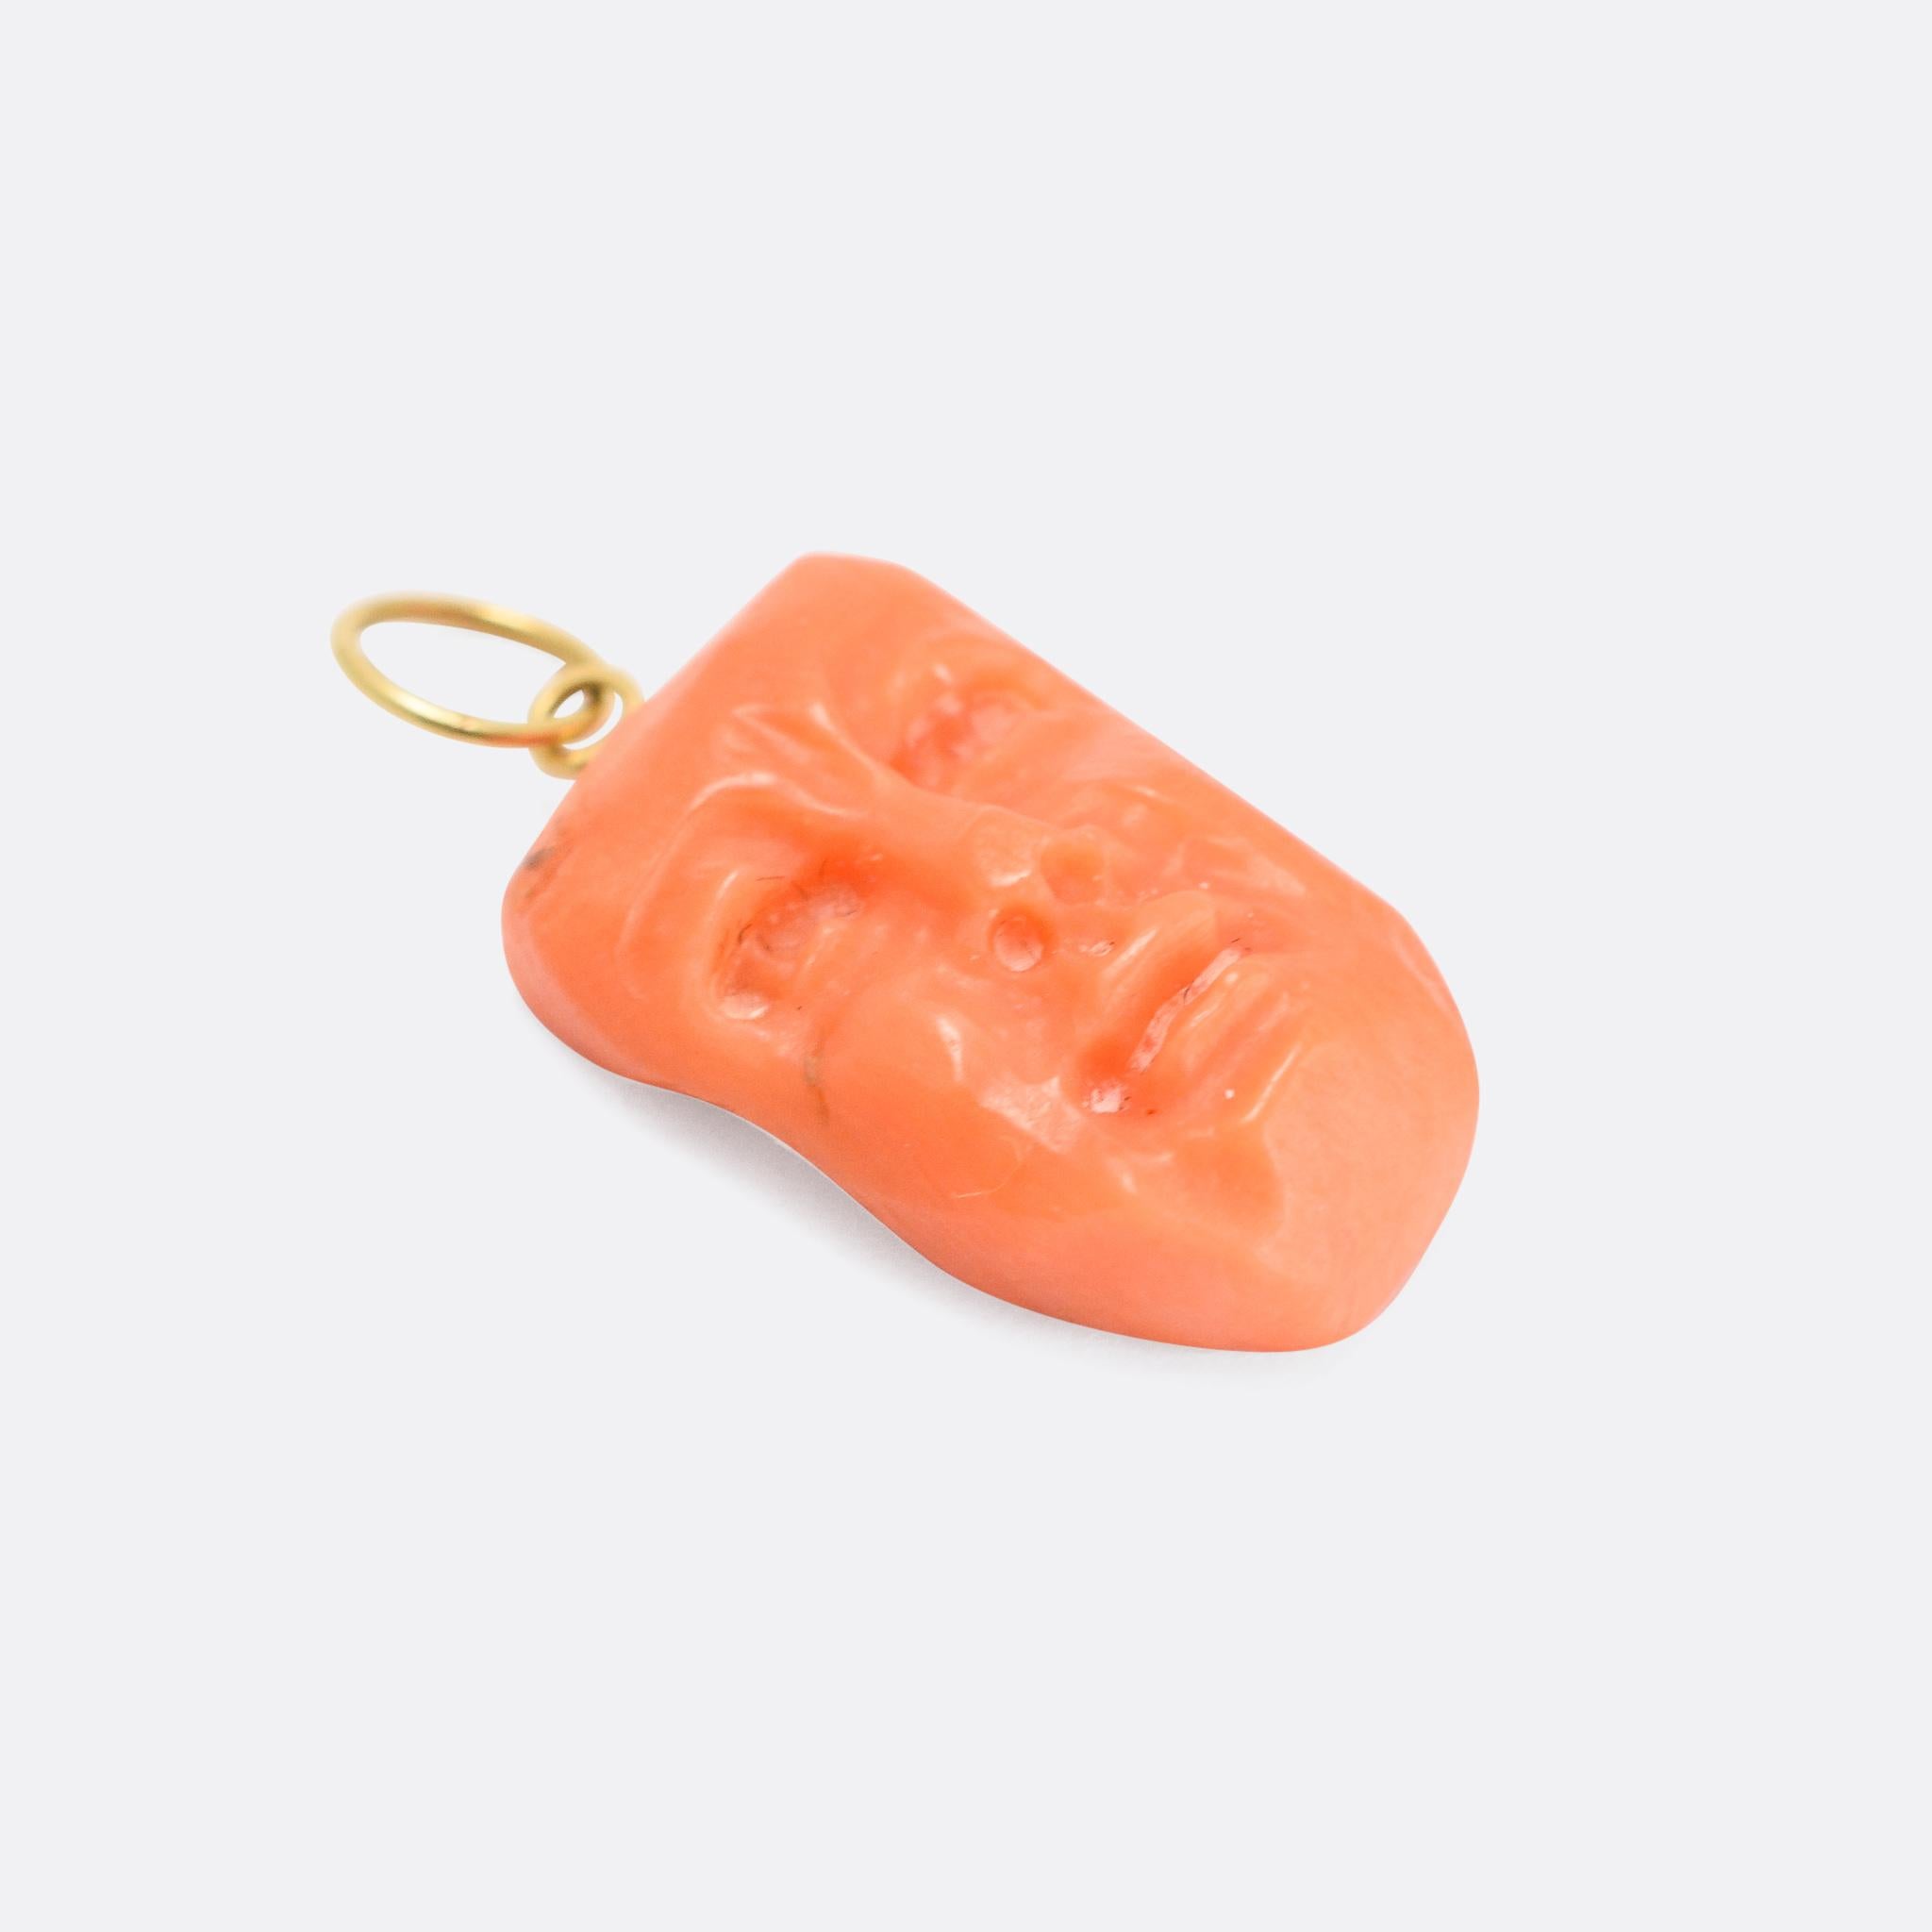 A weird antique pendant dating from the mid Victorian era, circa 1870. It's crafted from a single piece of coral, and has been carved with a face or mask. With gold fittings at the top for wear as a pendant.

STONES 
Coral

MEASUREMENTS 
2.1 x